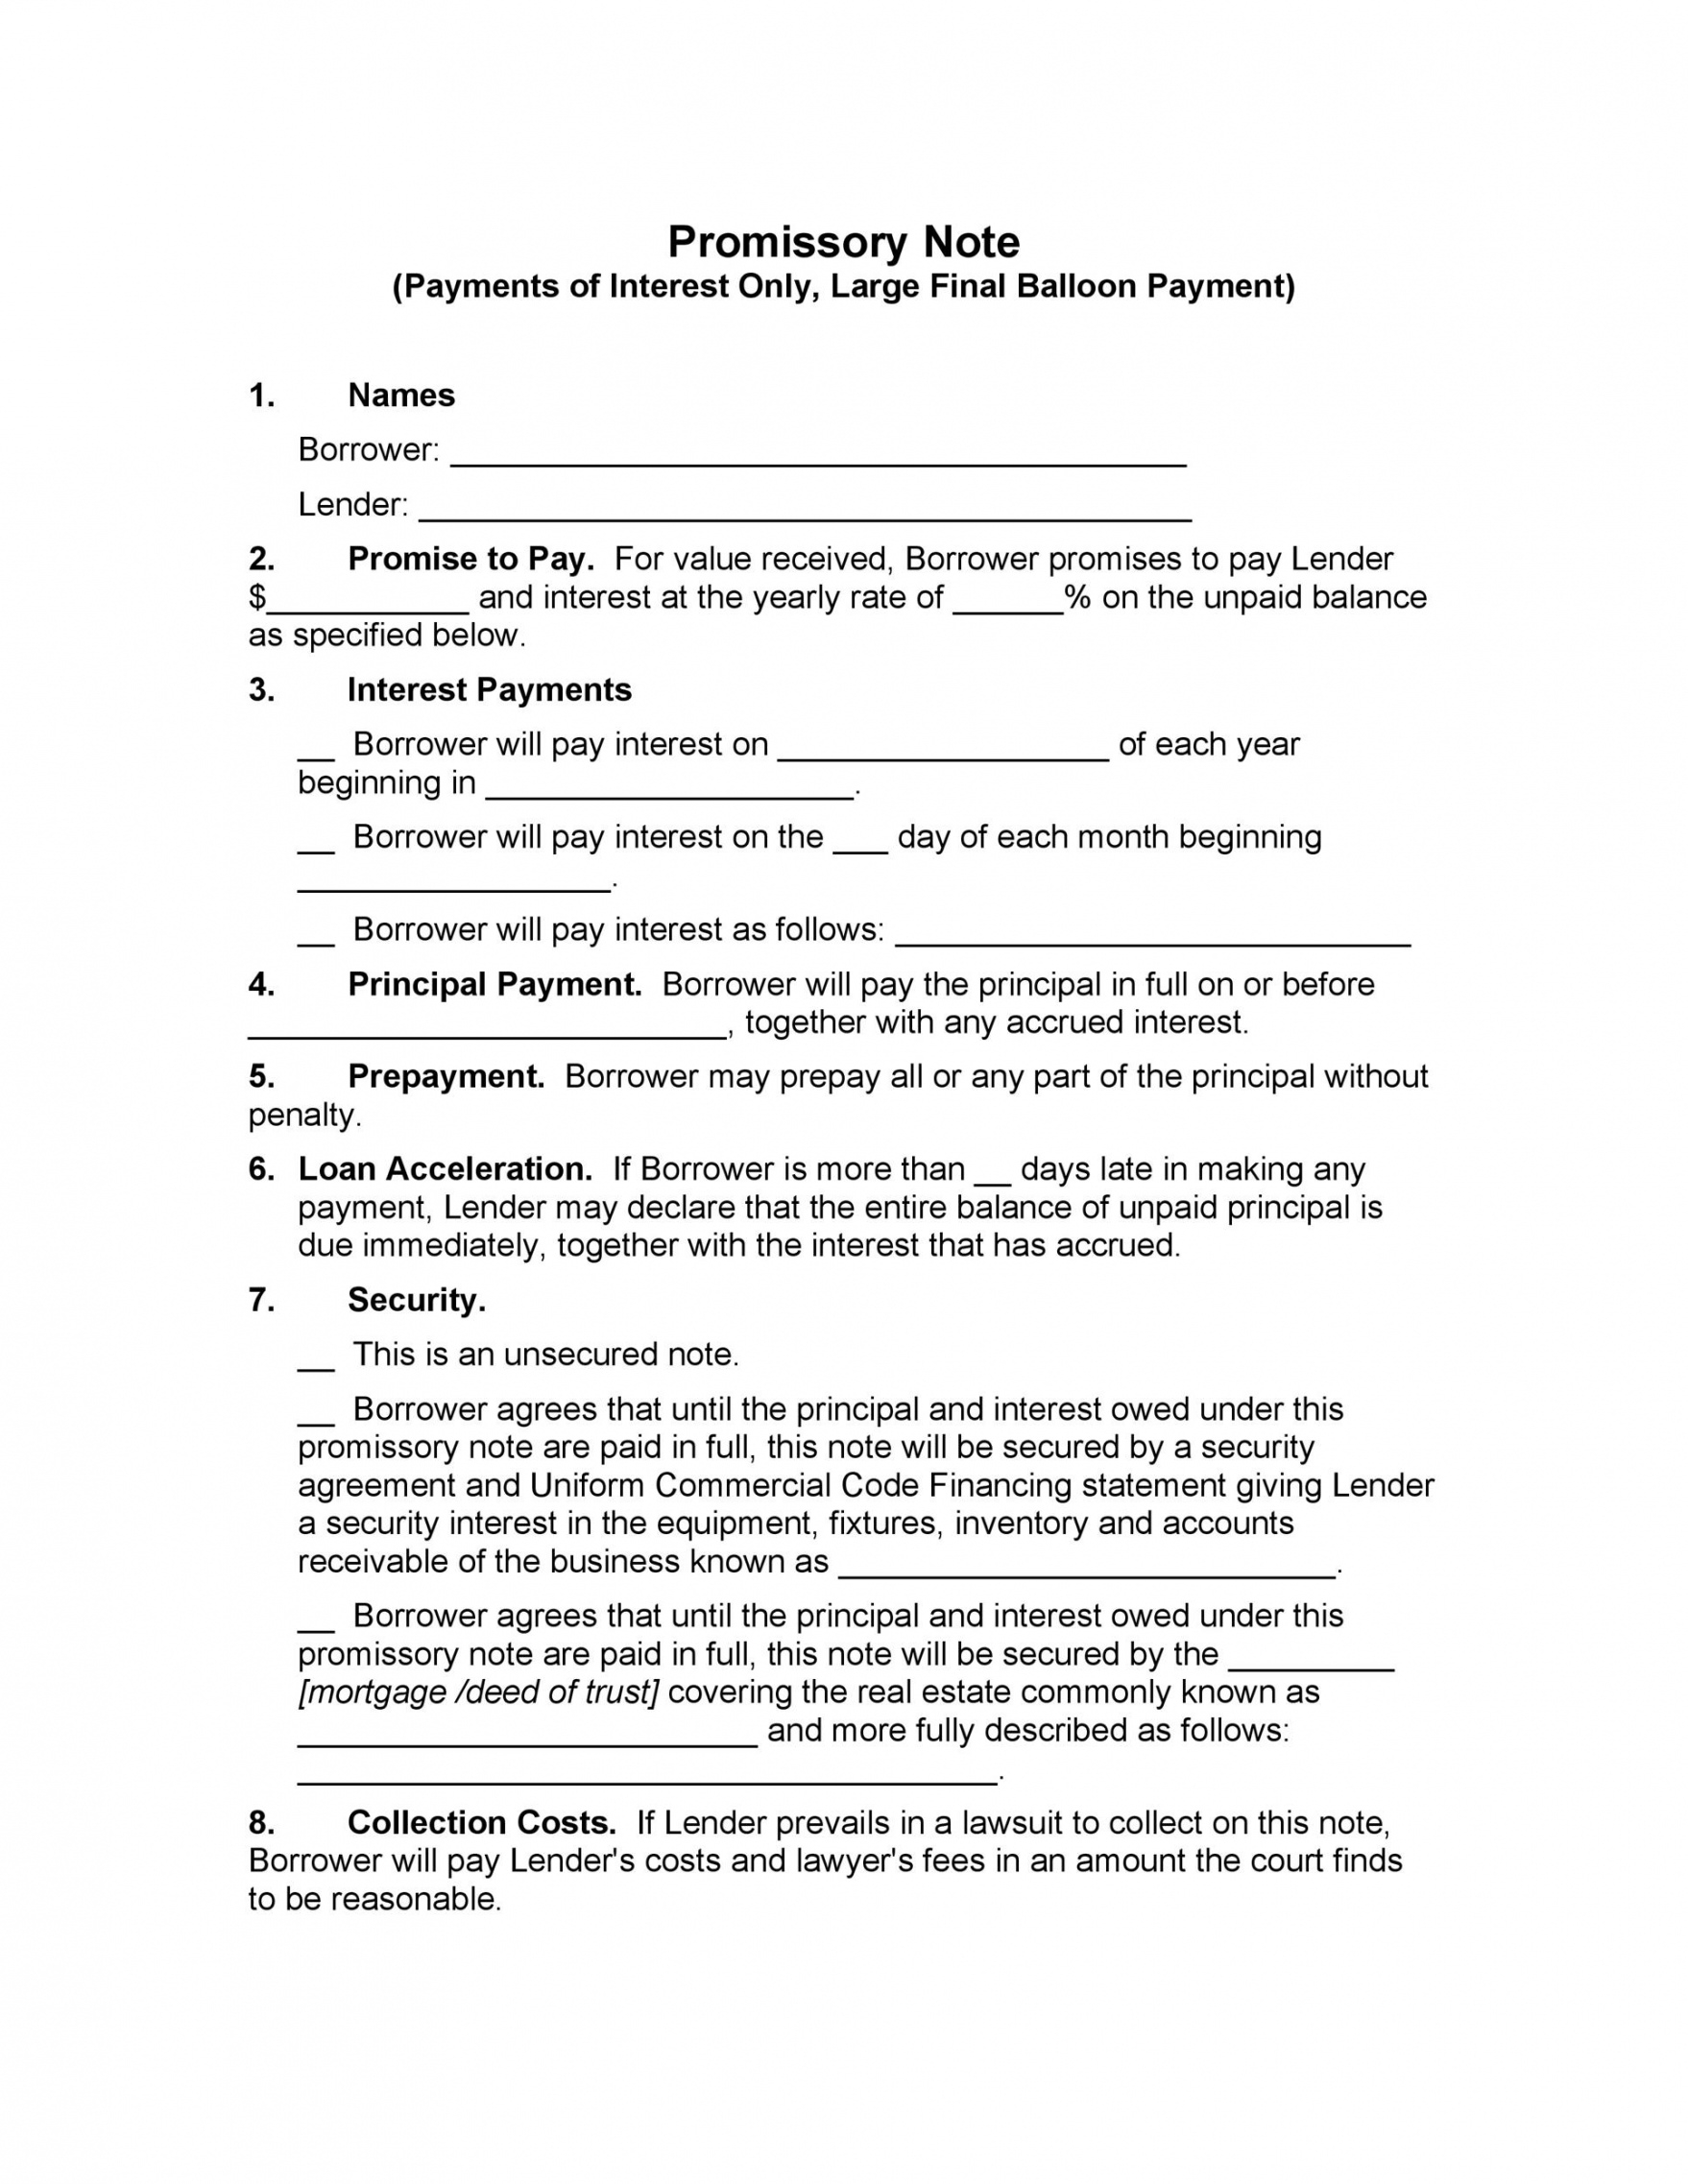 45 free promissory note templates &amp; forms word &amp; pdf ᐅ promise to pay agreement template example